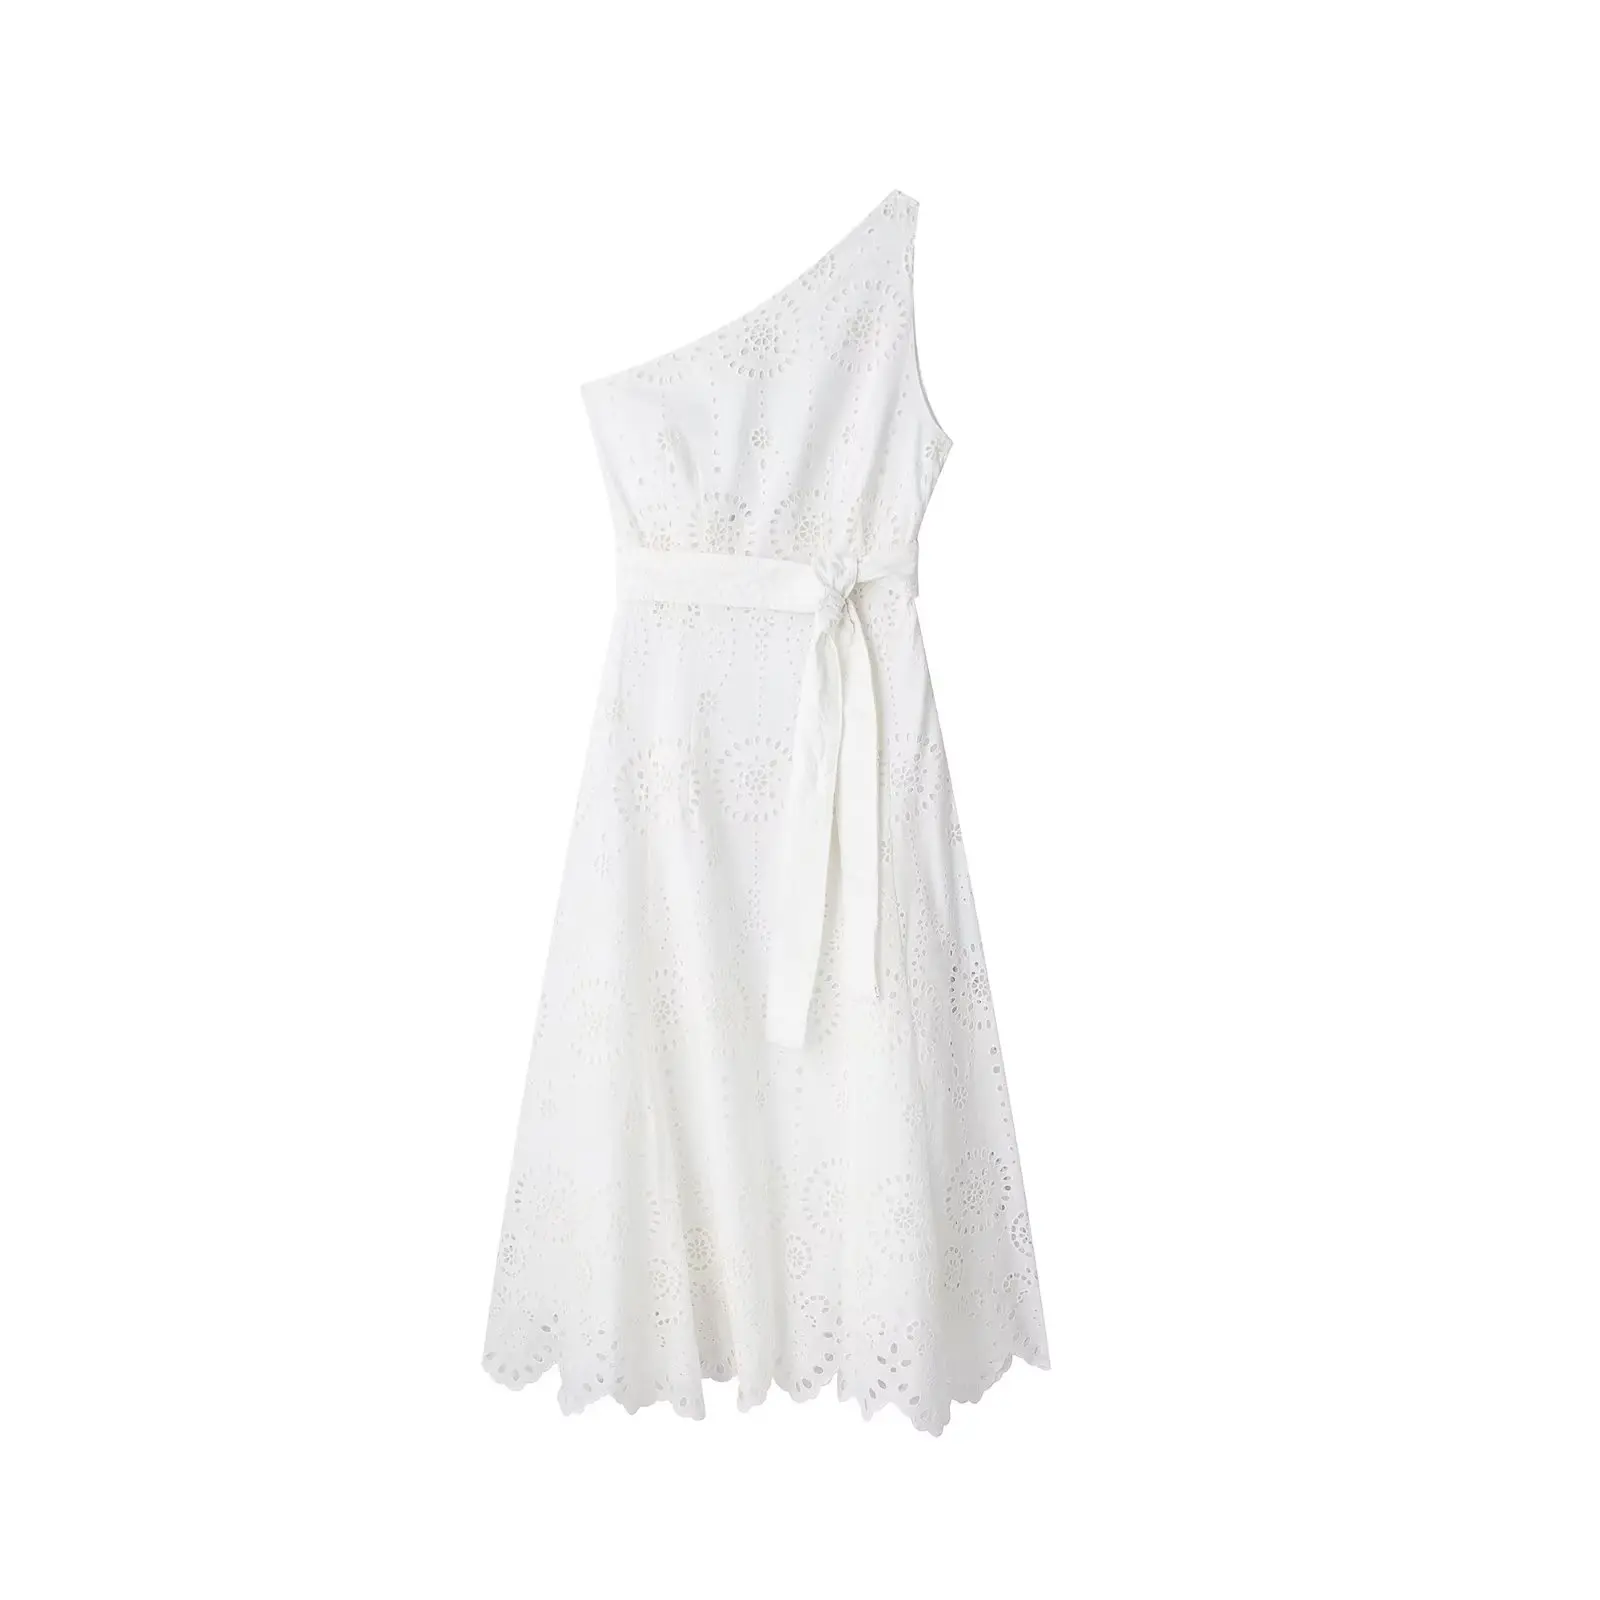 

DYLQFS 2023 NEW Summer Women White Asymmetry Hollow out Sashes Decoration Casual Vintage Sweet Dresses